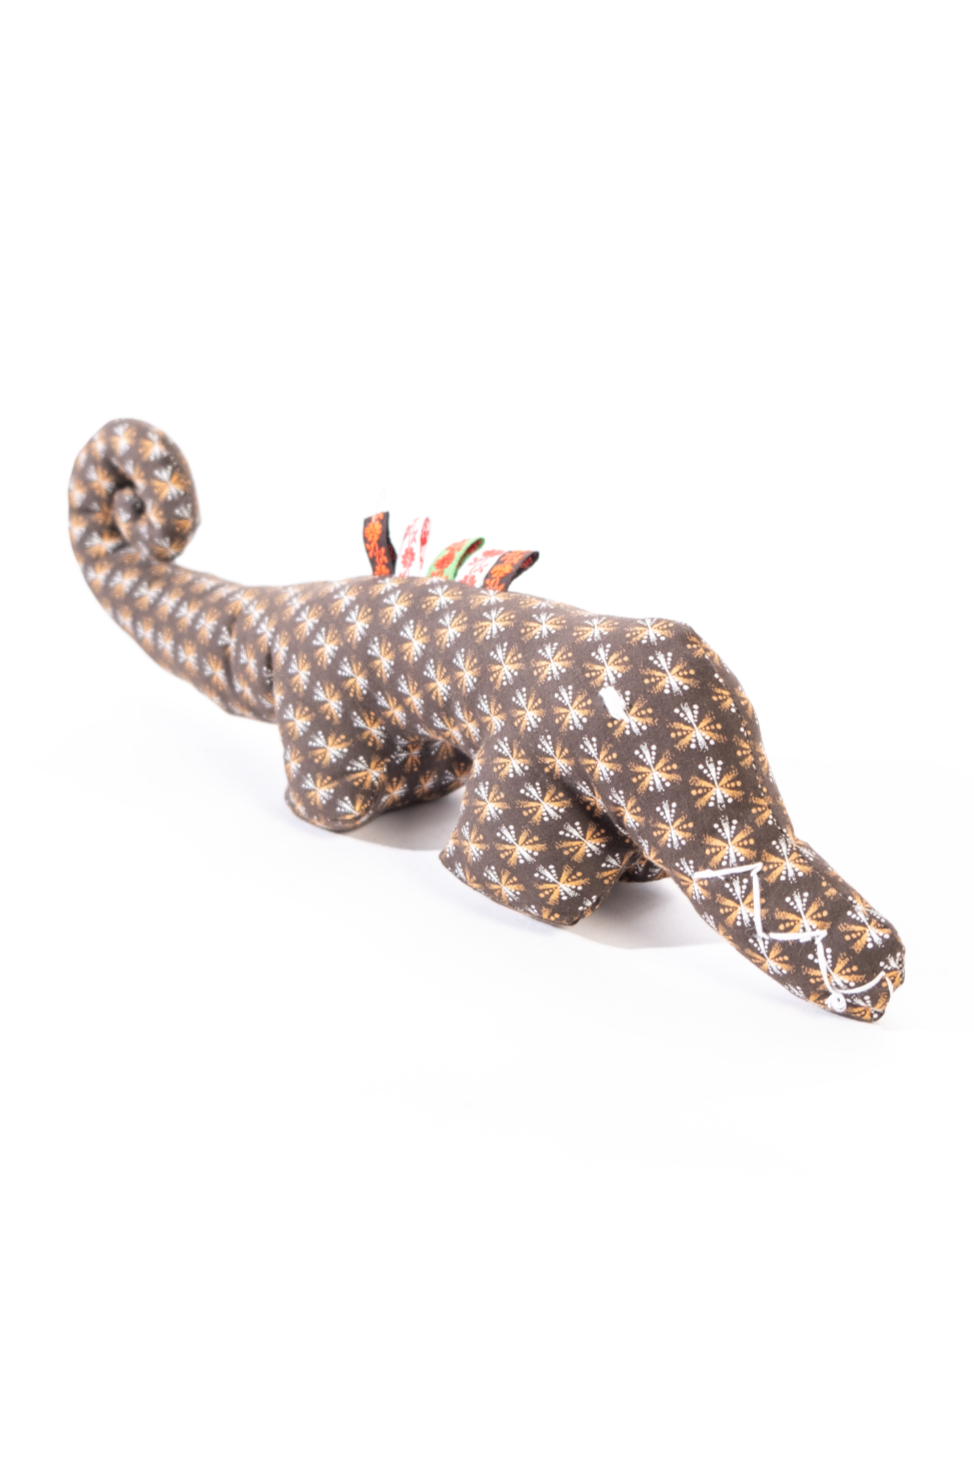 Handmade African Material Crocodile Soft Toy